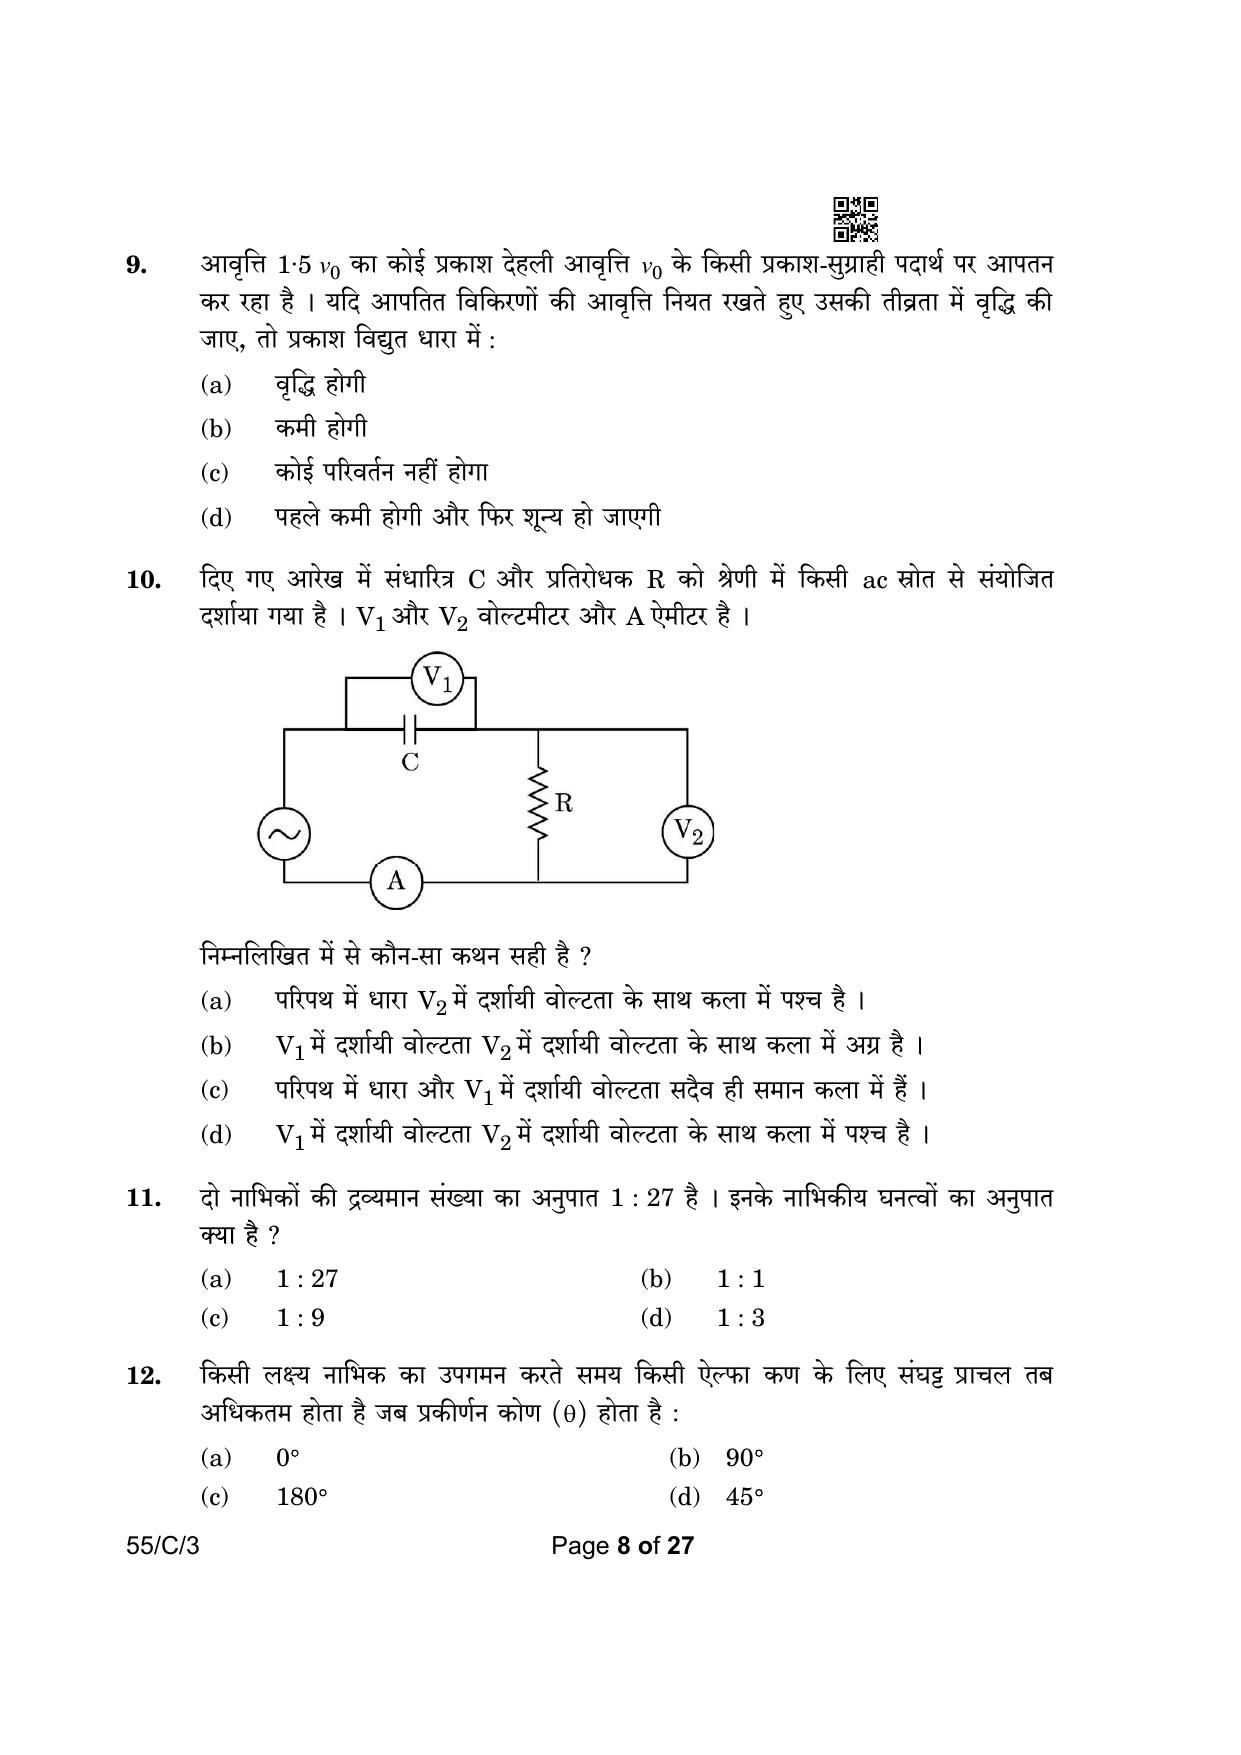 CBSE Class 12 55-3 Physics 2023 (Compartment) Question Paper - Page 8